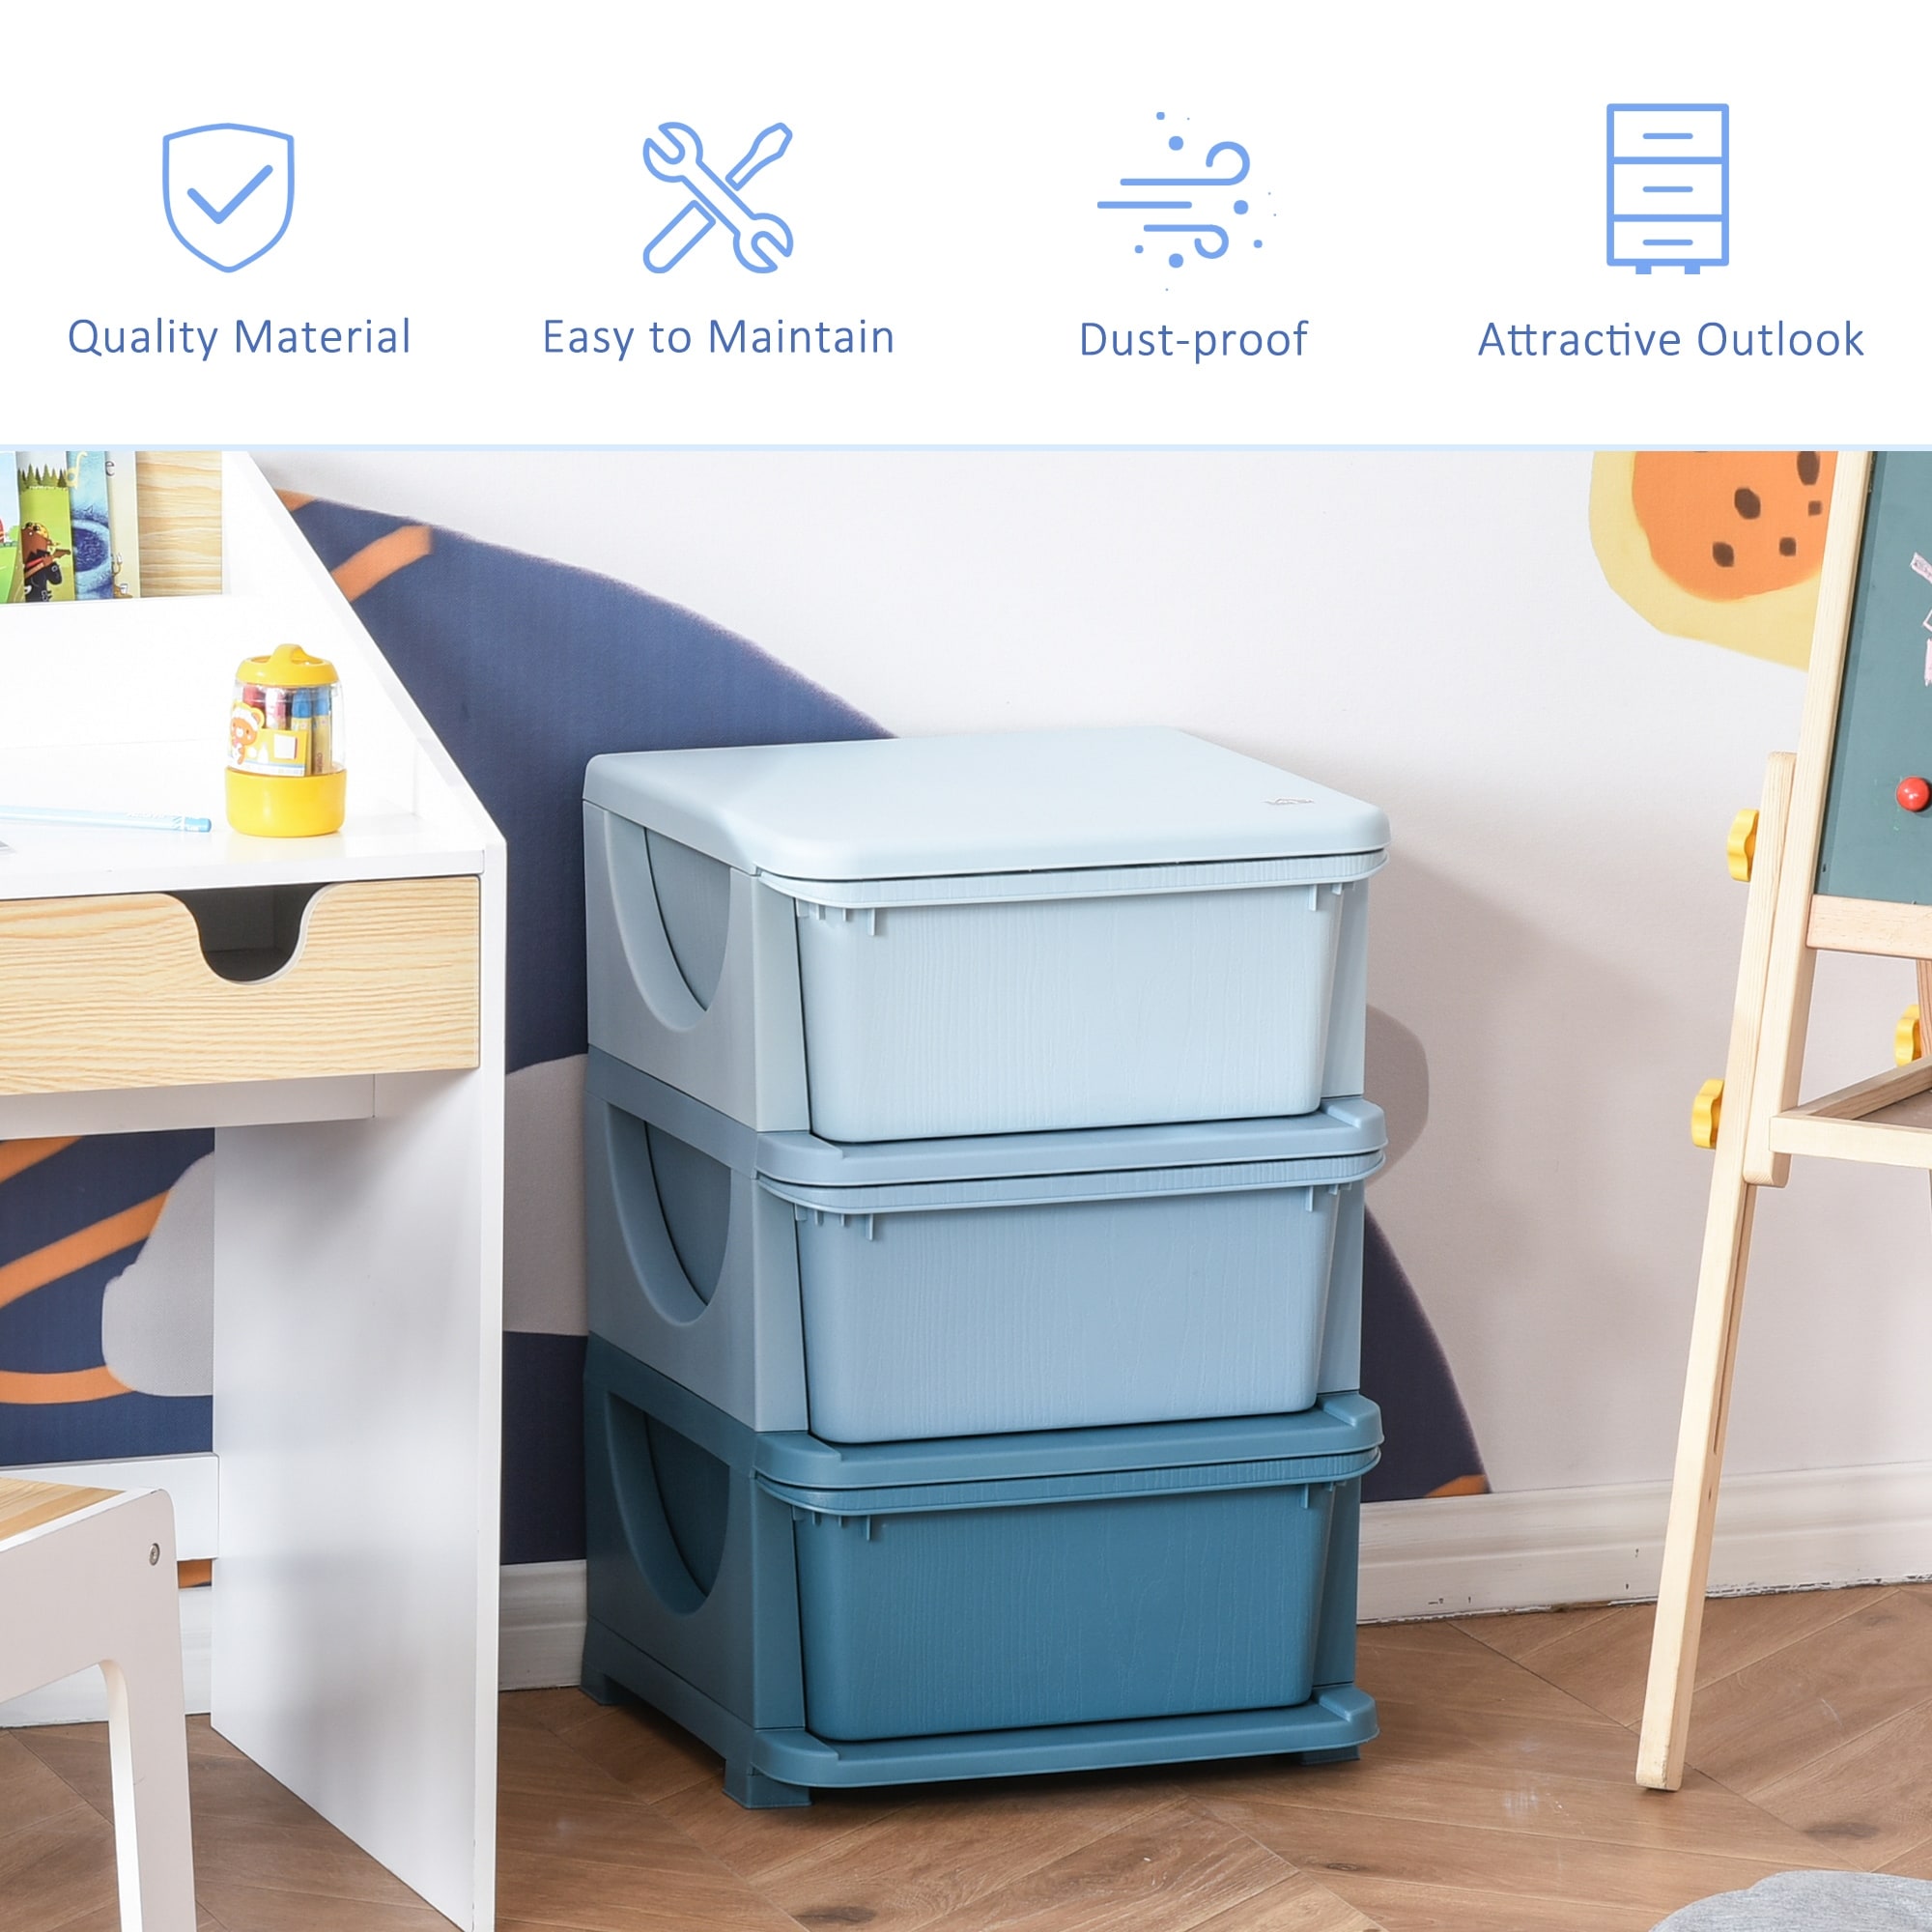 https://ak1.ostkcdn.com/images/products/is/images/direct/769846fcfb0fe1ccfaf1cf0f2a7b2b538fad2d9b/Qaba-Kids-Storage-Unit-Dresser-Tower-with-Drawers-3-Tier-Chest-Toy-Organizer-for-Bedroom-Kindergarten-for-Boys-Girls-Toddlers.jpg